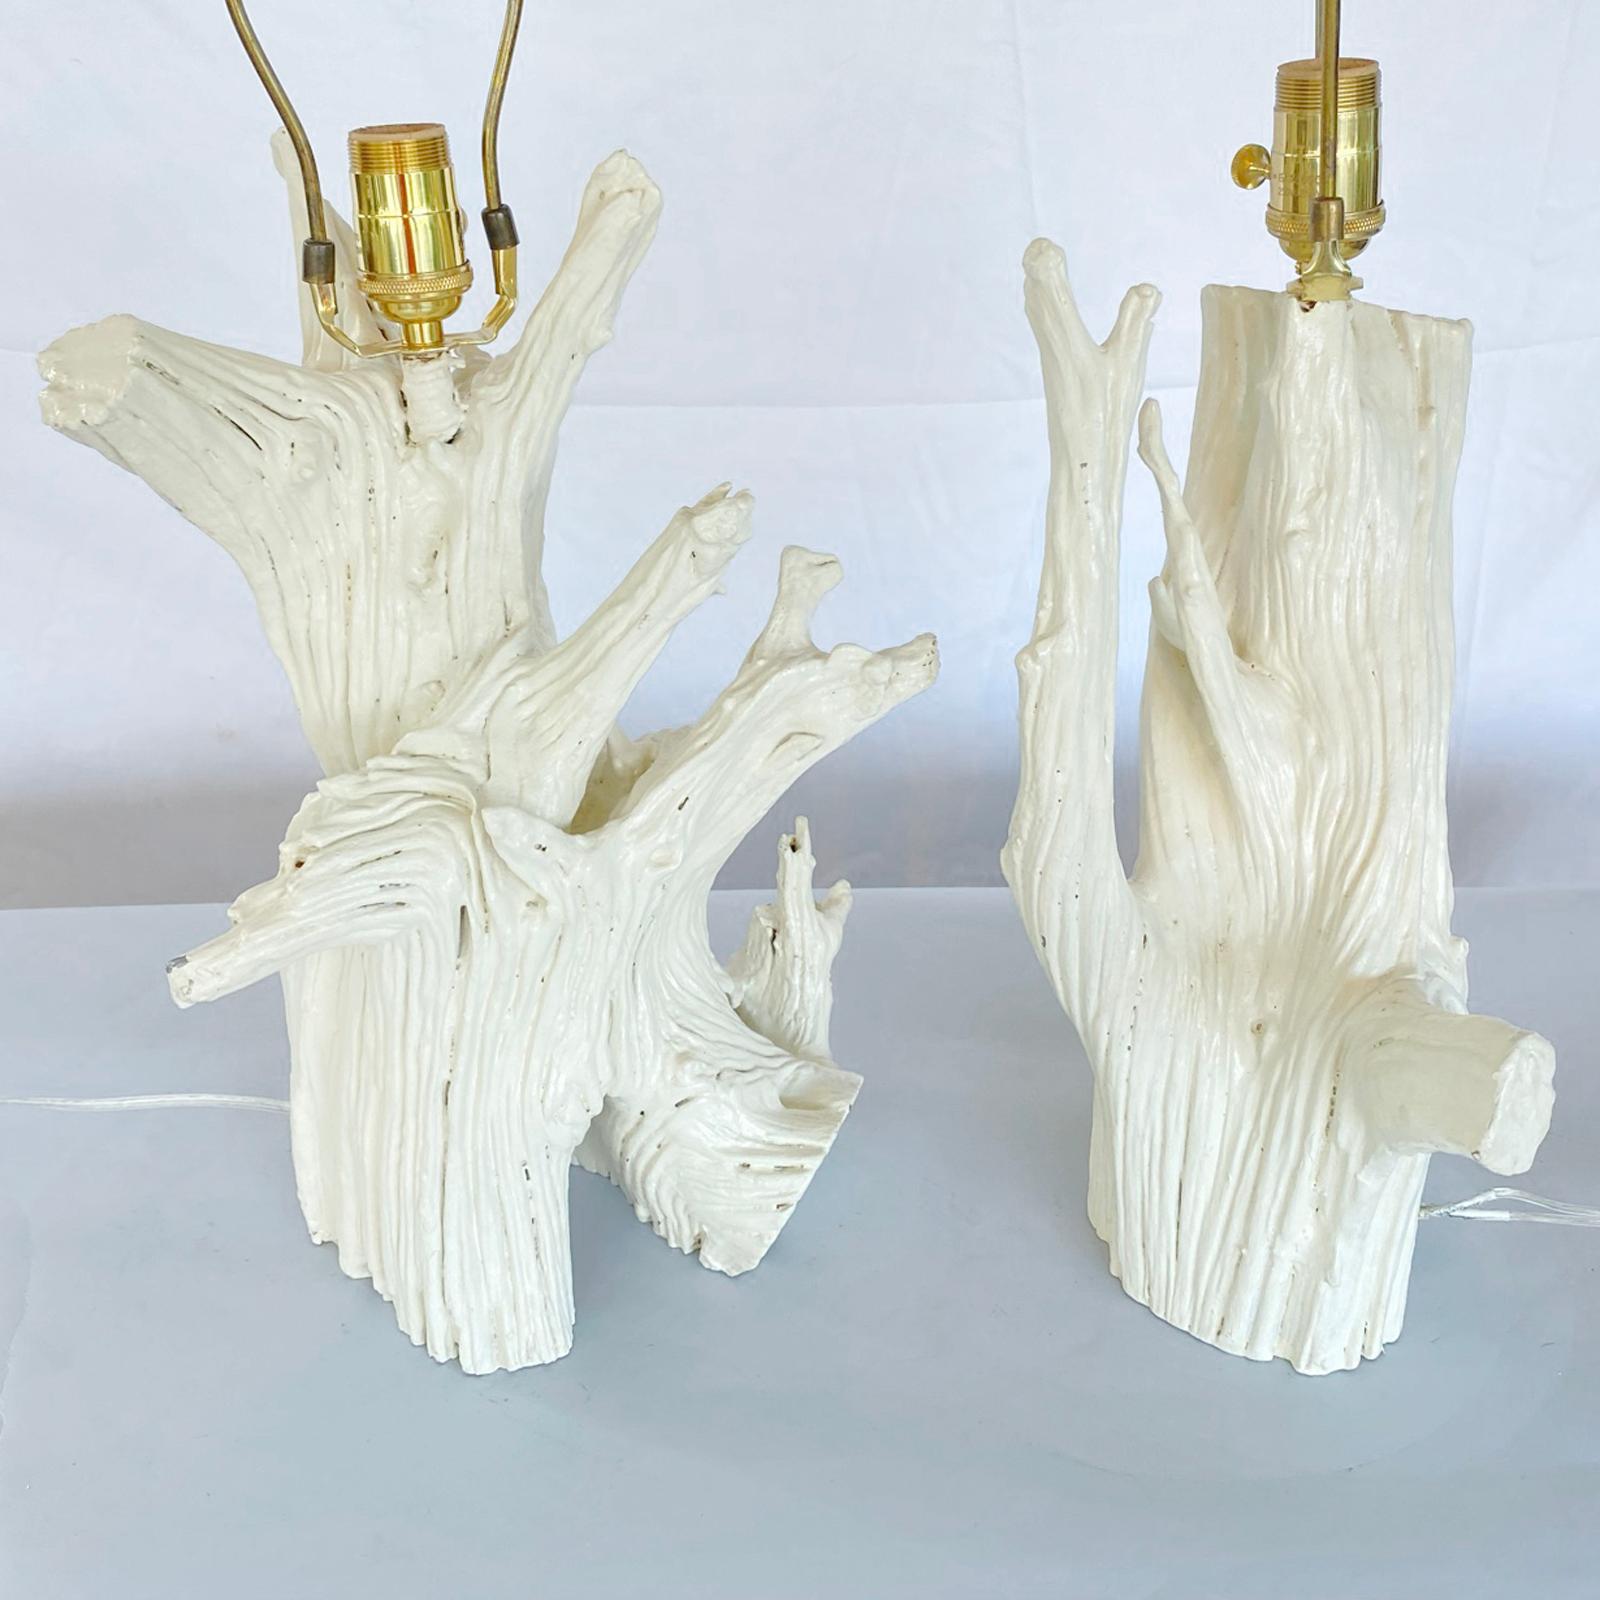 Unusual pair of vIntage, painted arboreal lamps, each solid and heavy twisted root fragment, wired with a three-way socket; matching root finials. 

Second lamp measures 26.5